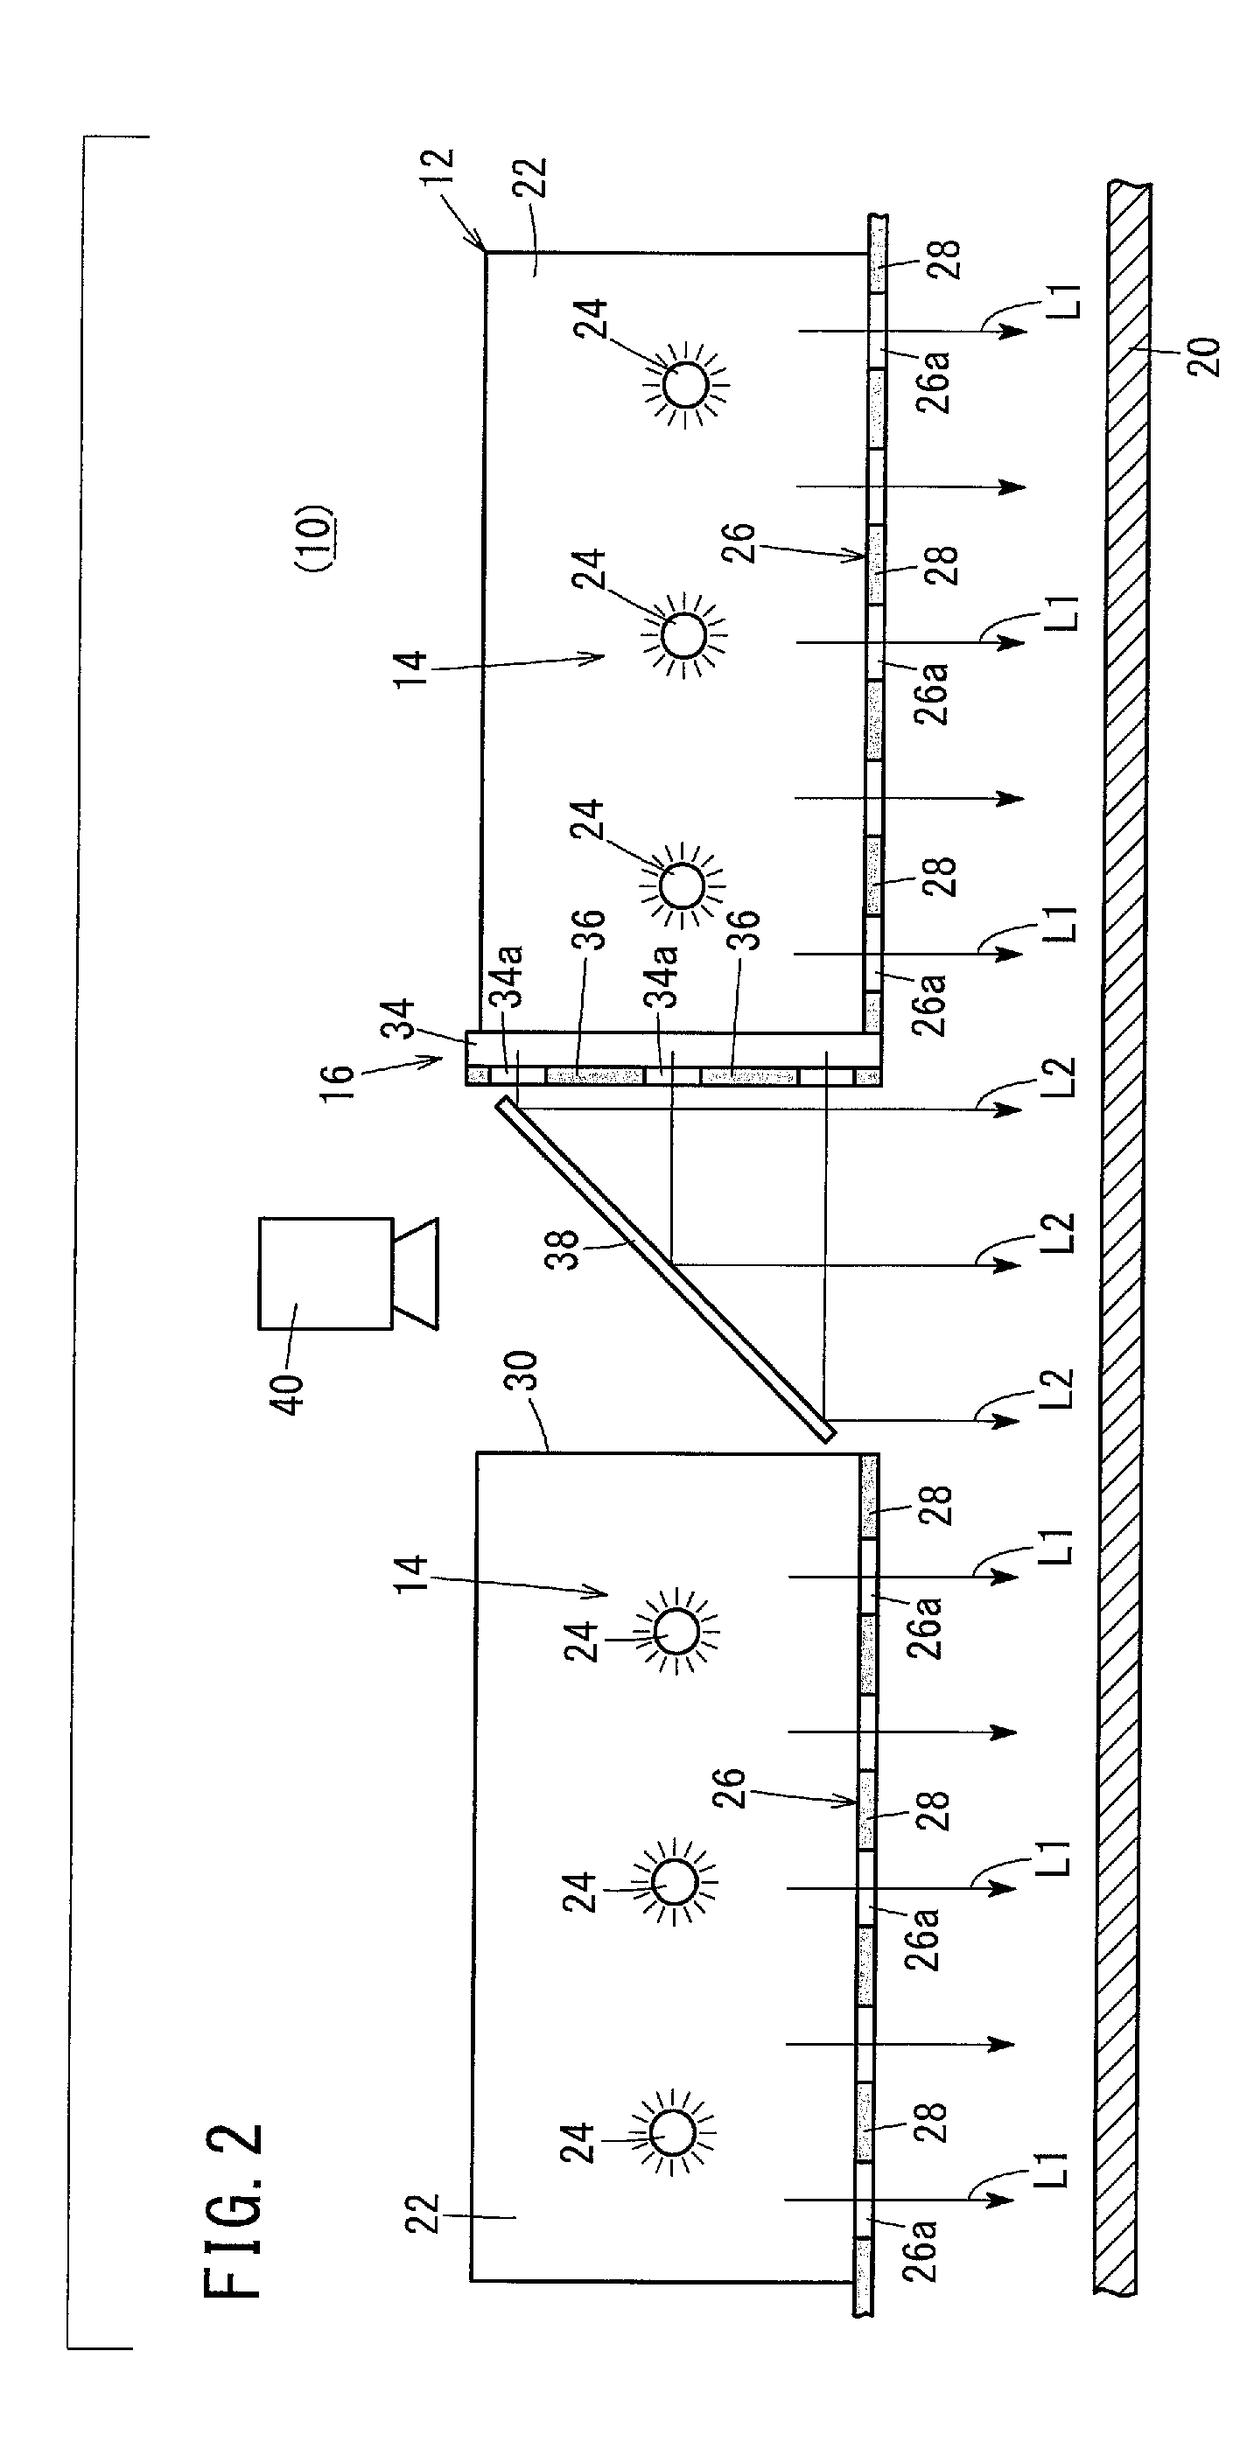 Defect inspection method and apparatus therefor